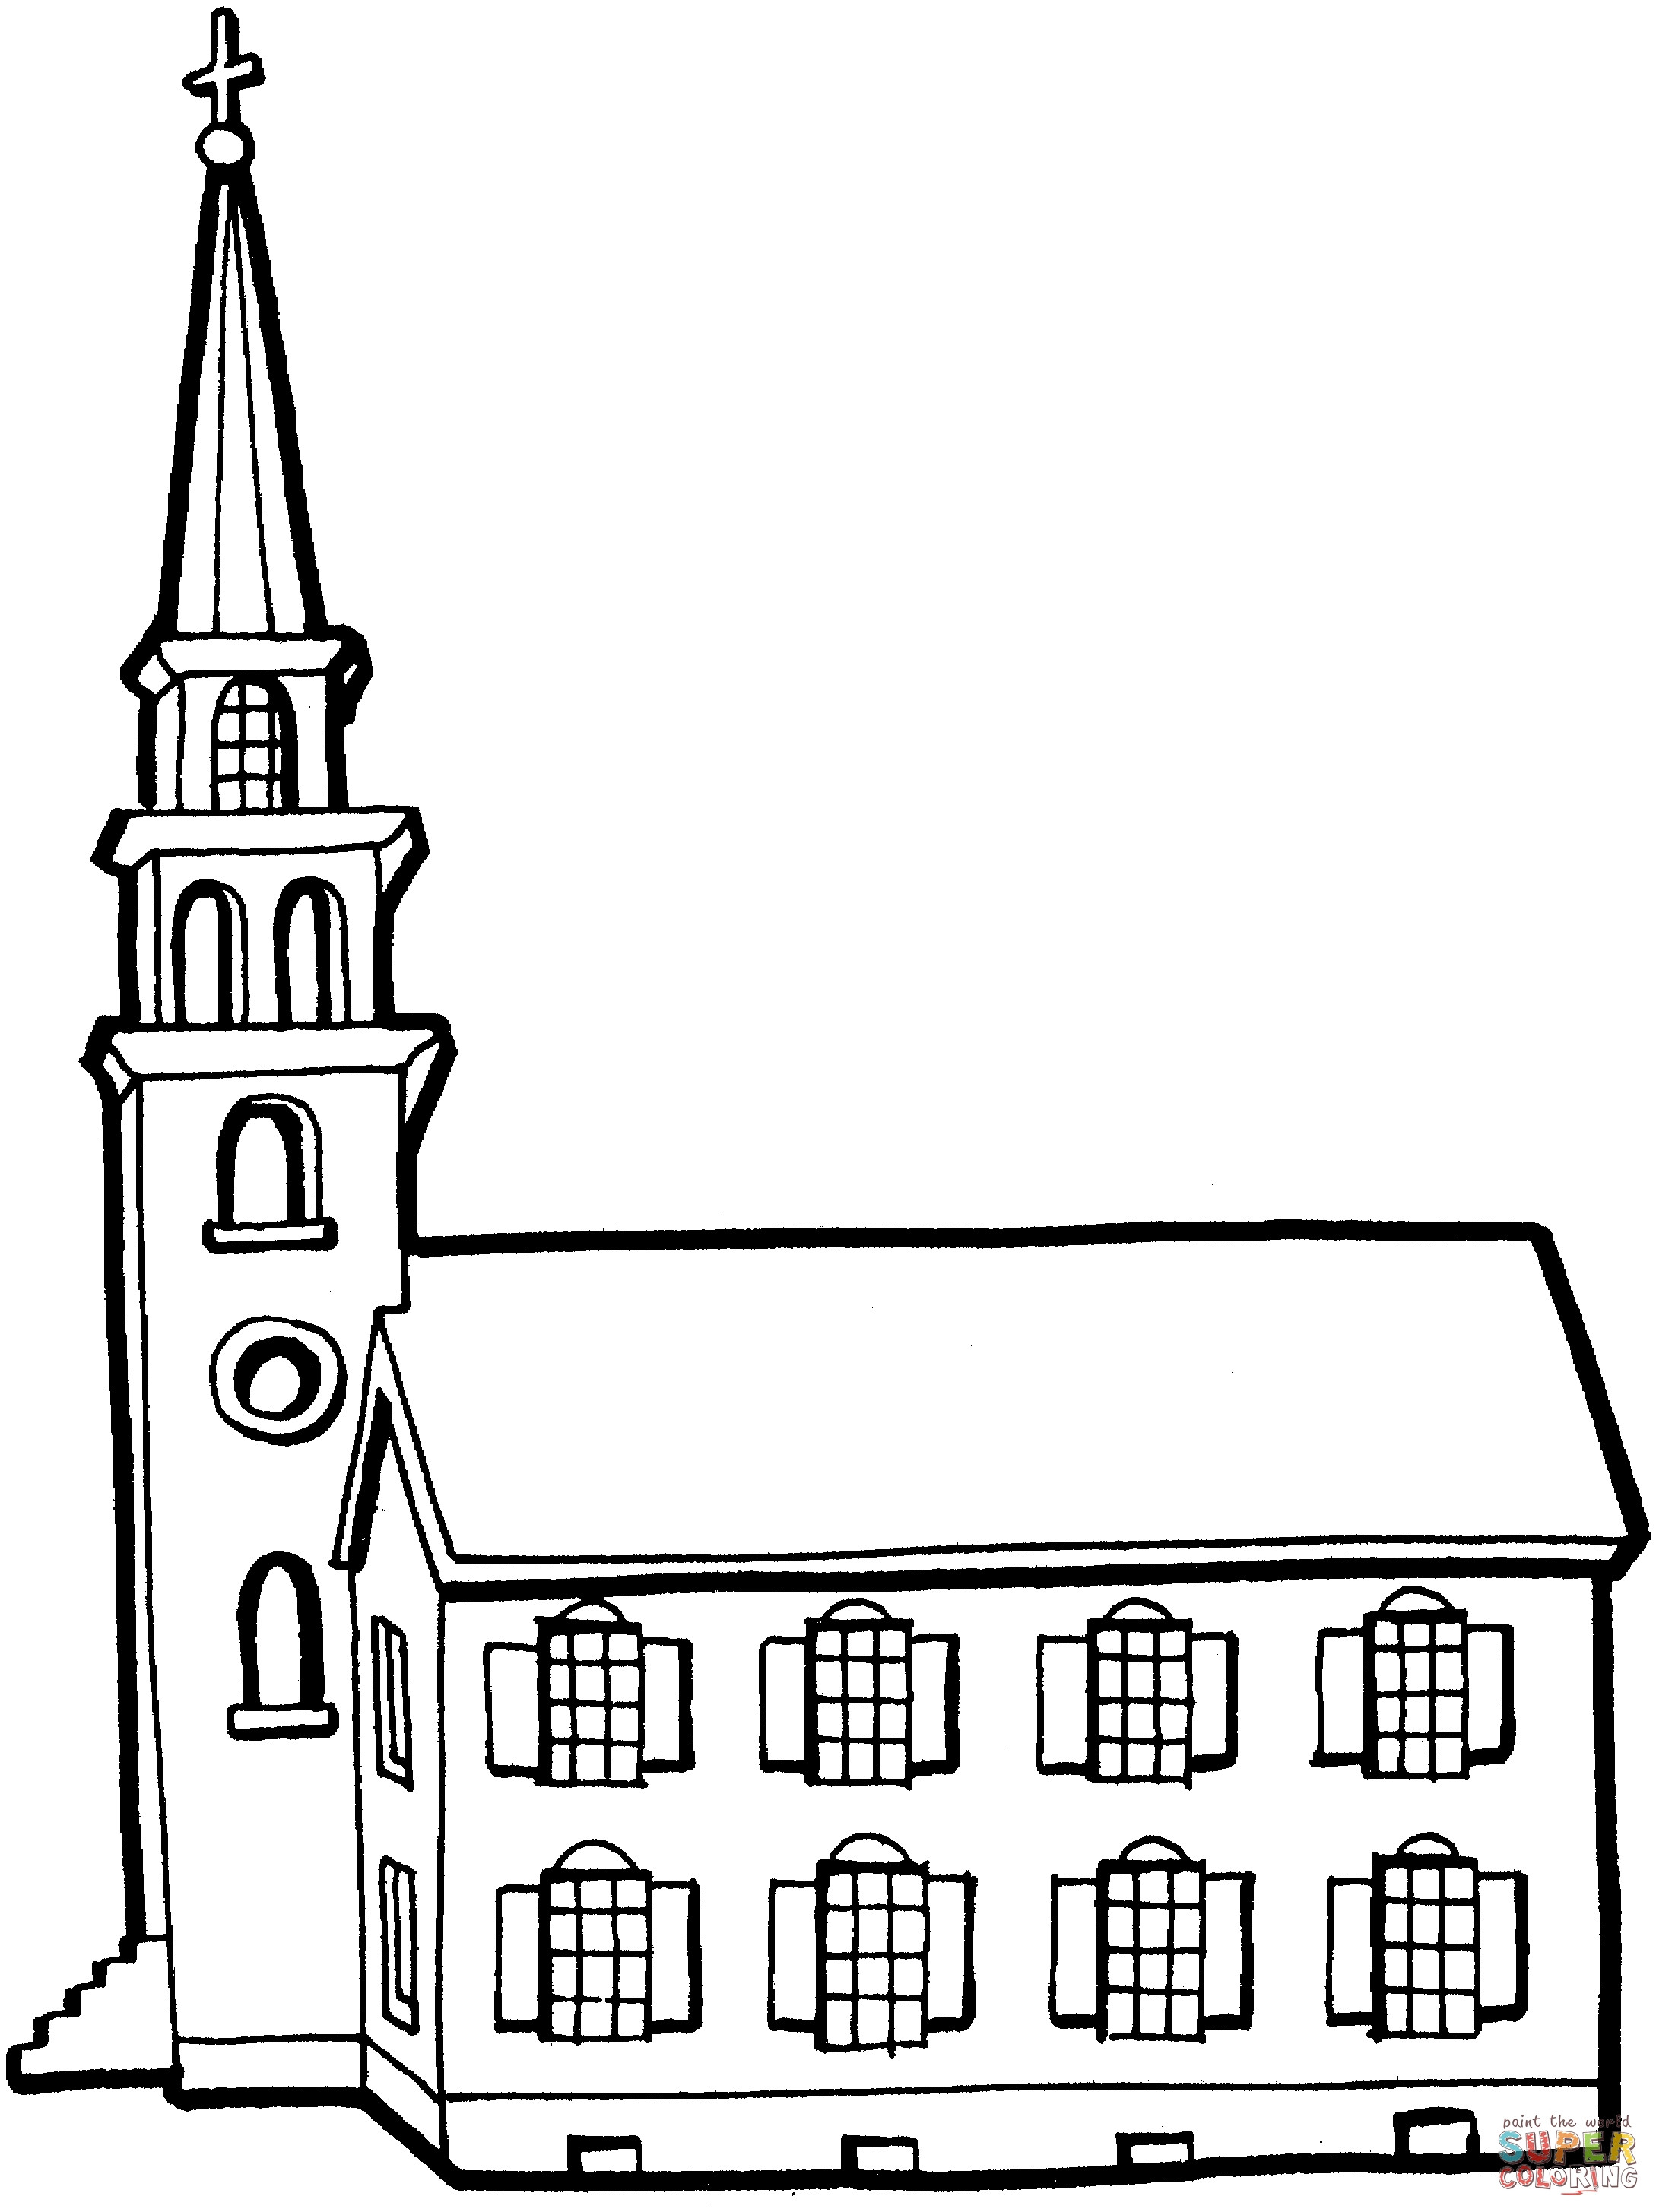 Free Printable Coloring Pages For Children'S Church
 Coloring Page A Church Interior design ideas